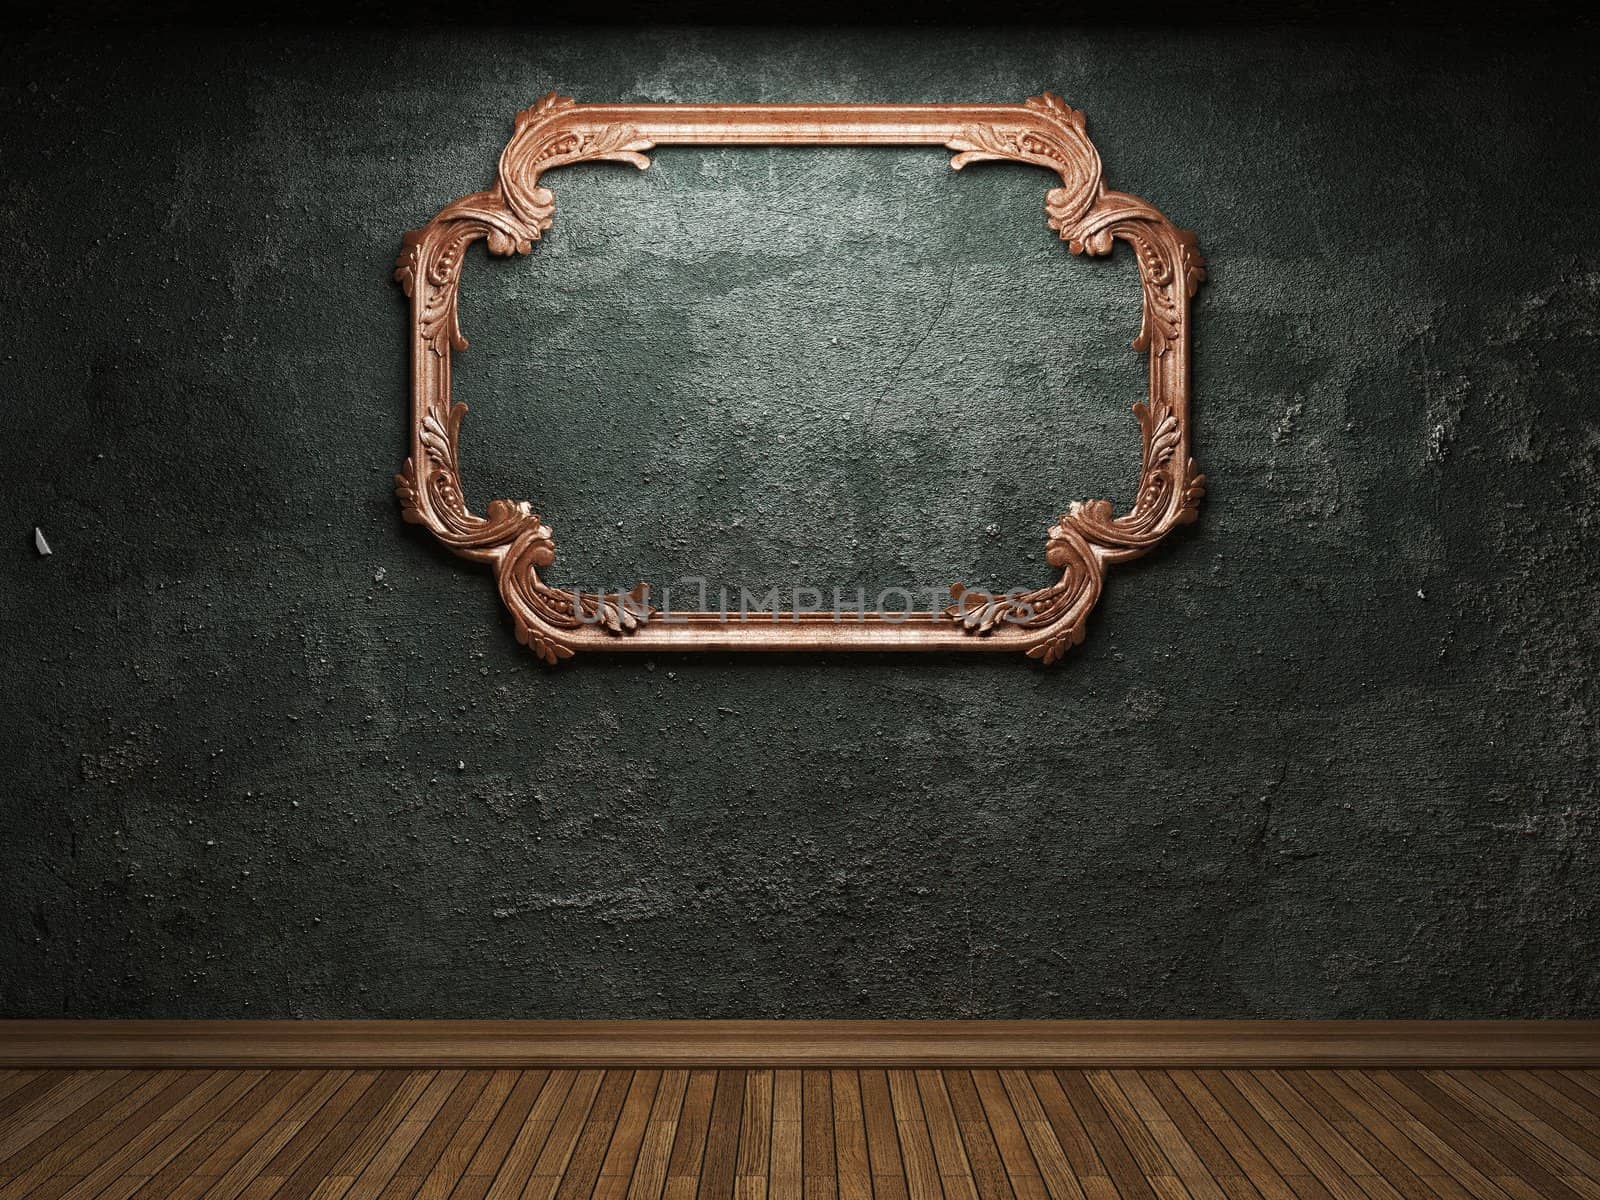 old concrete wall and frame made in 3D graphics